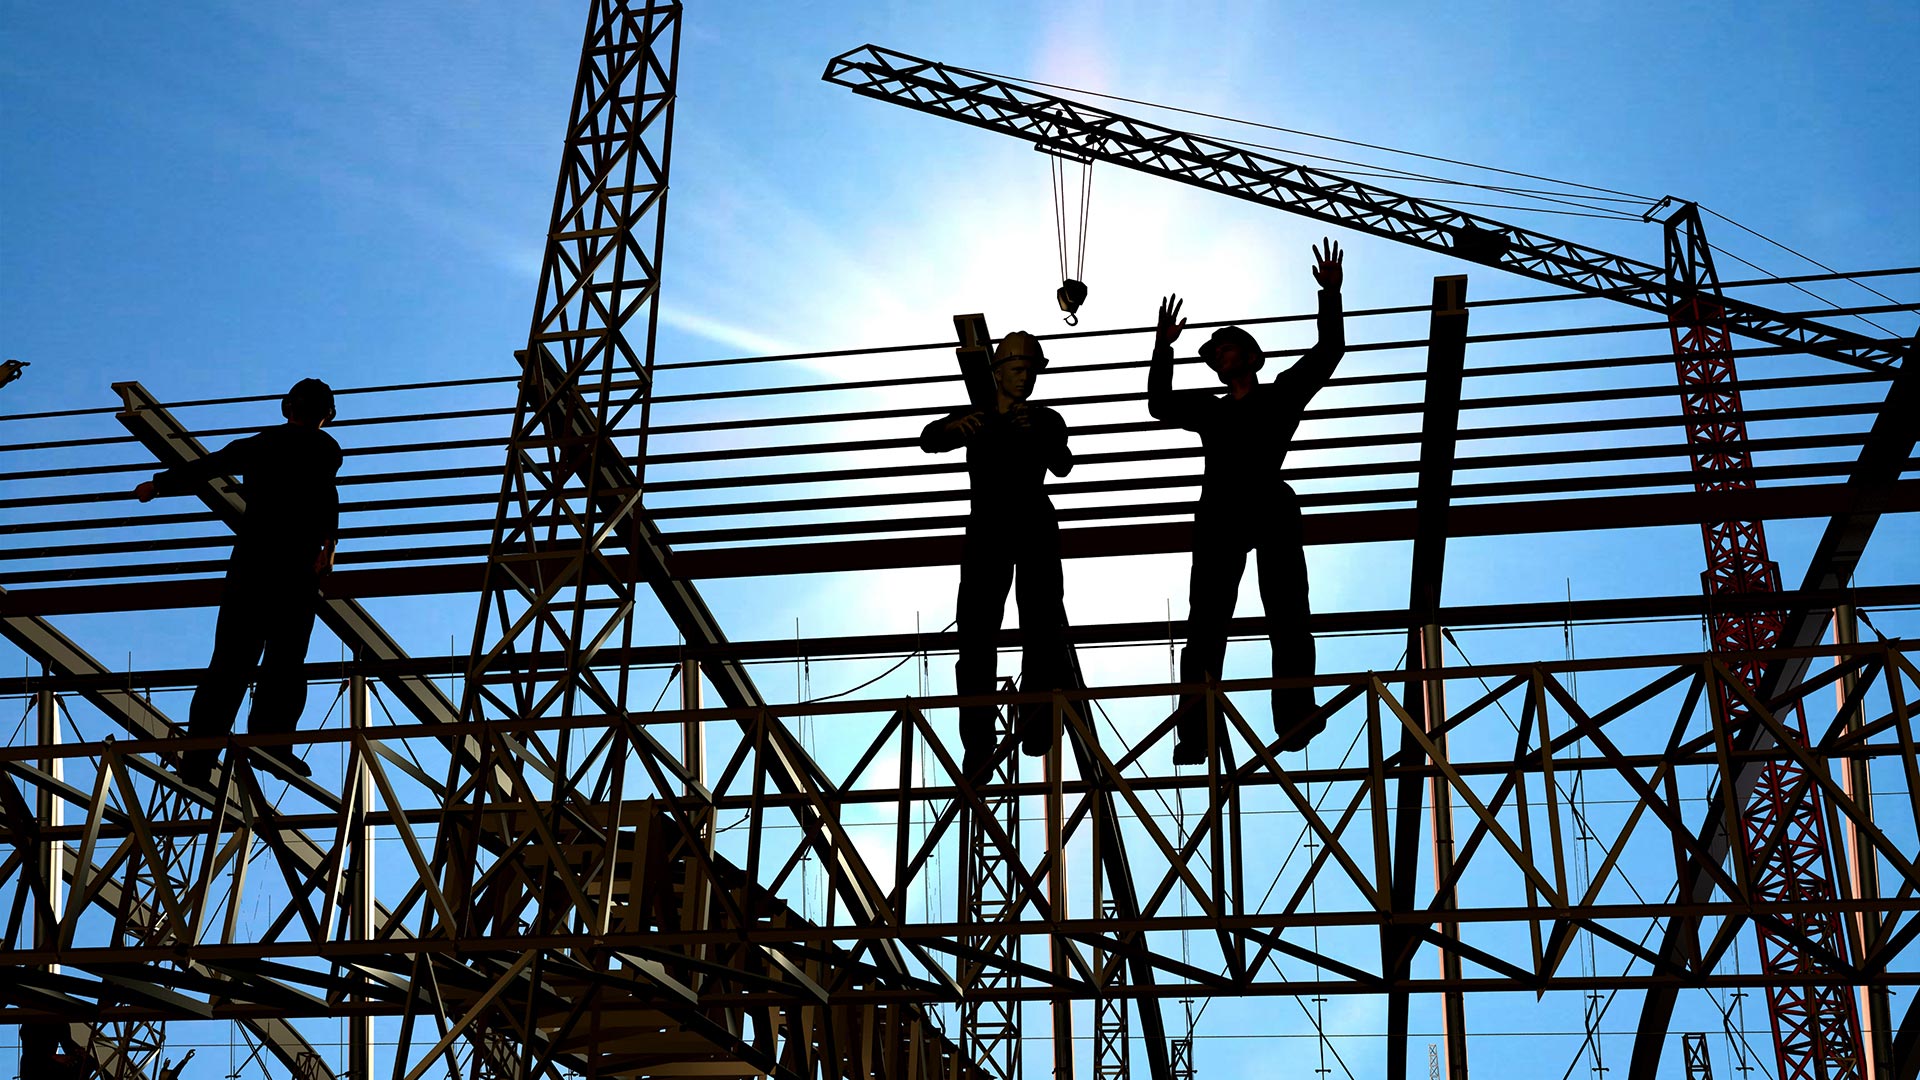 Construction workers onsite atop a steel structure.